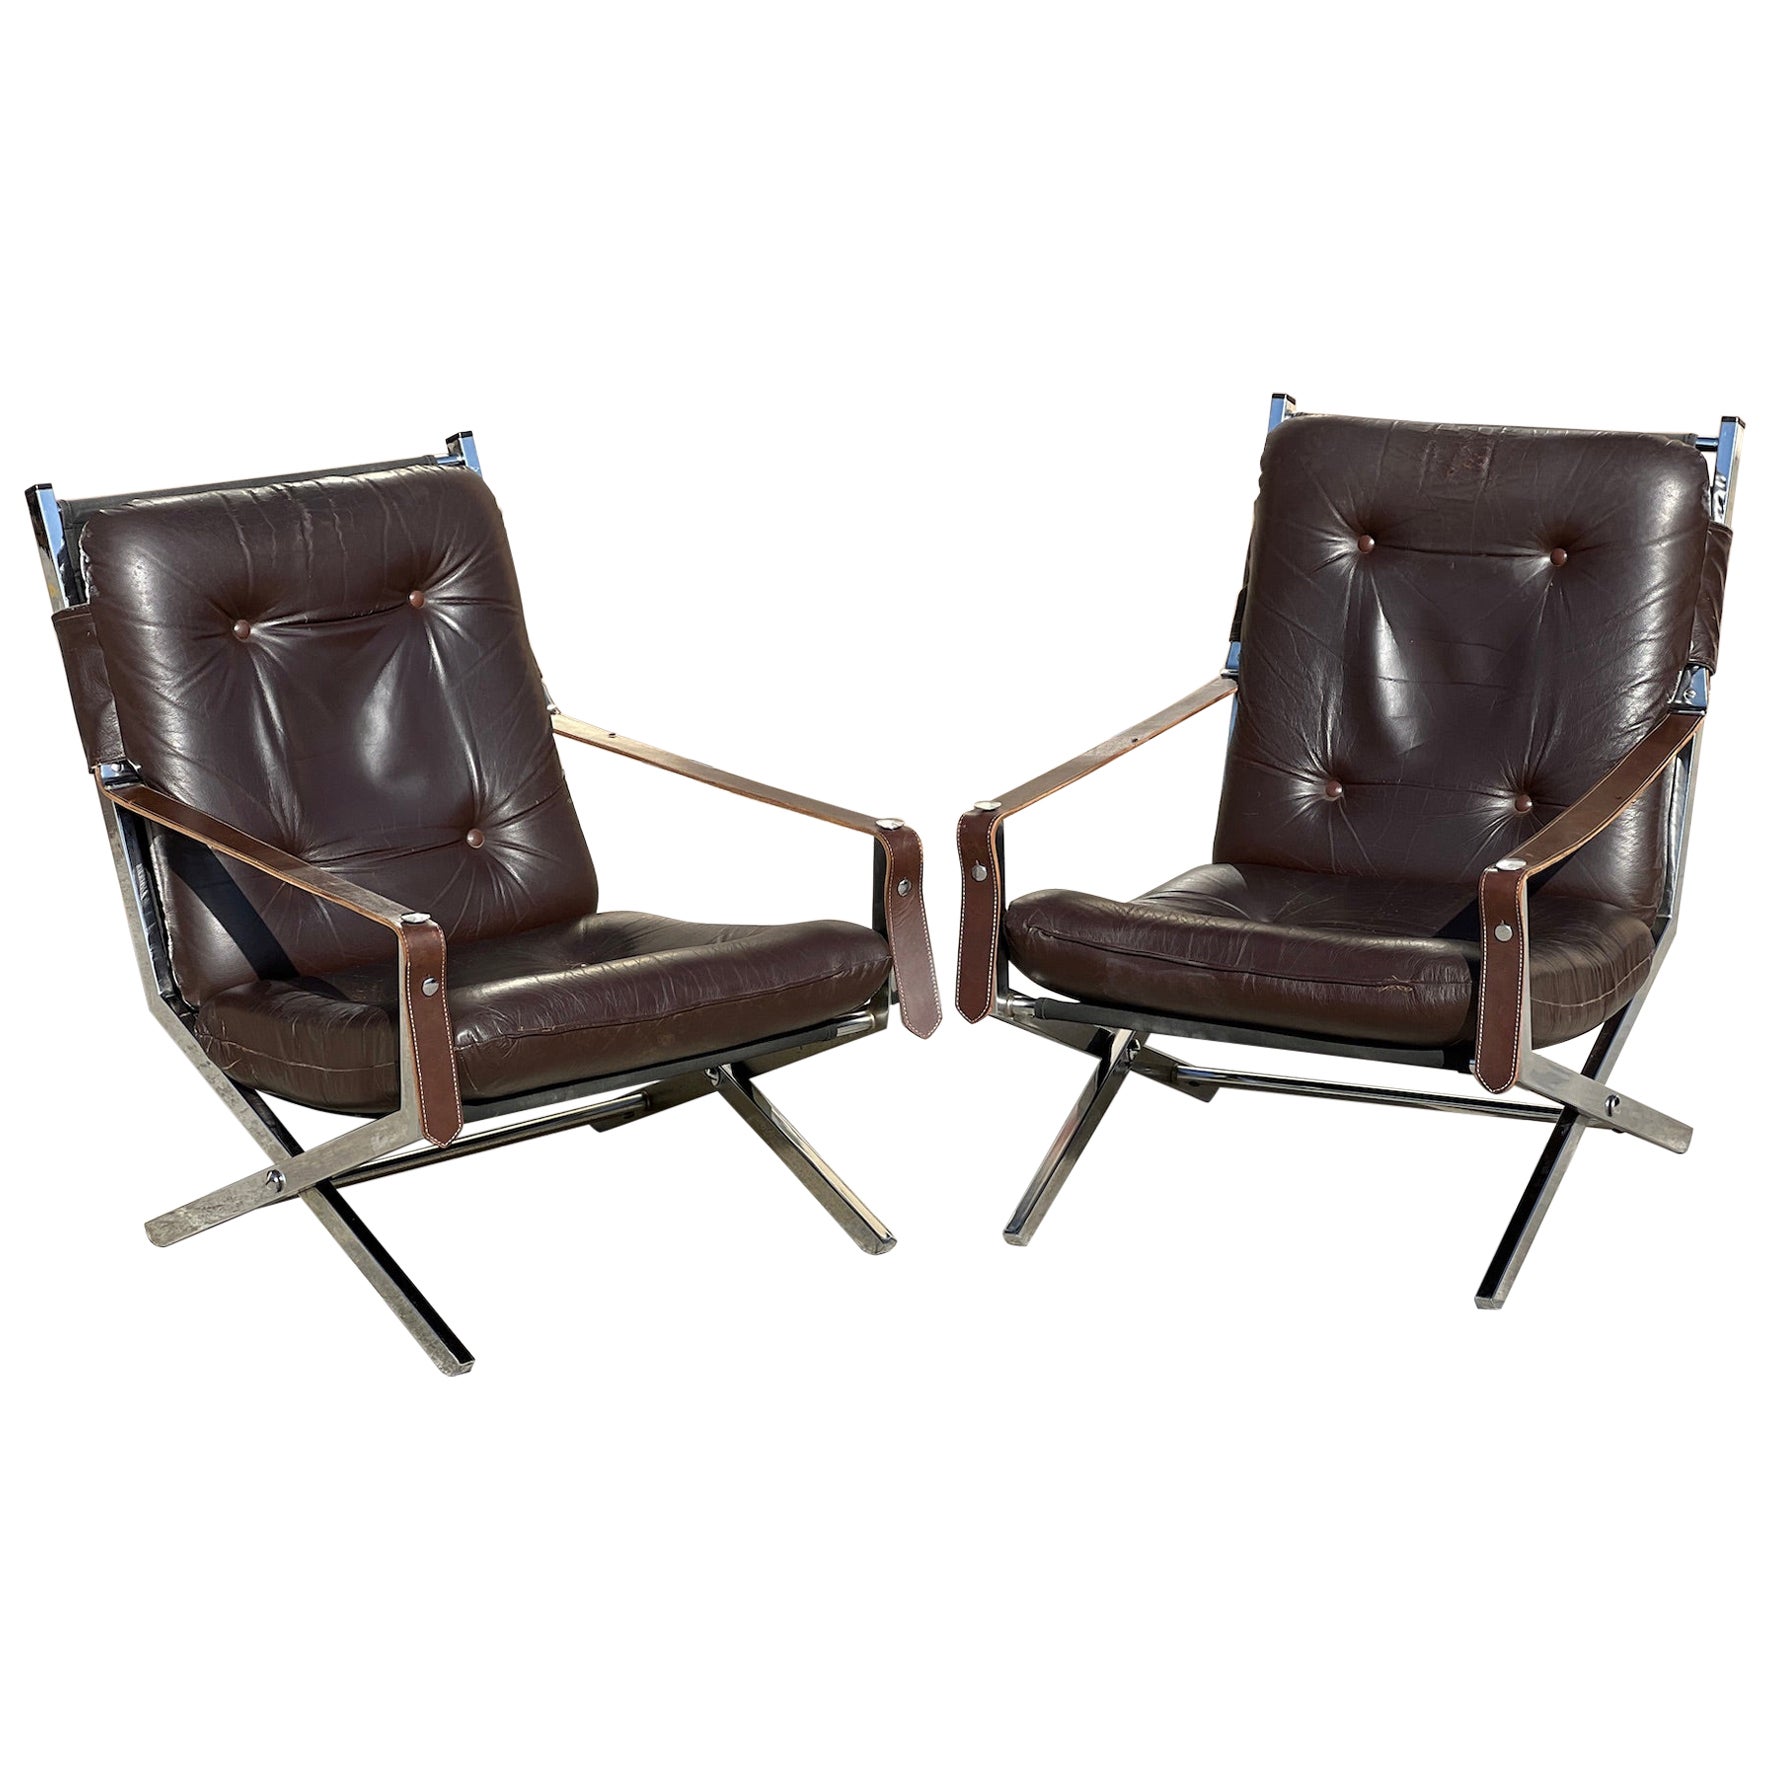 Pair of Vintage Folding Armchairs by Robert Duran, 1970 For Sale